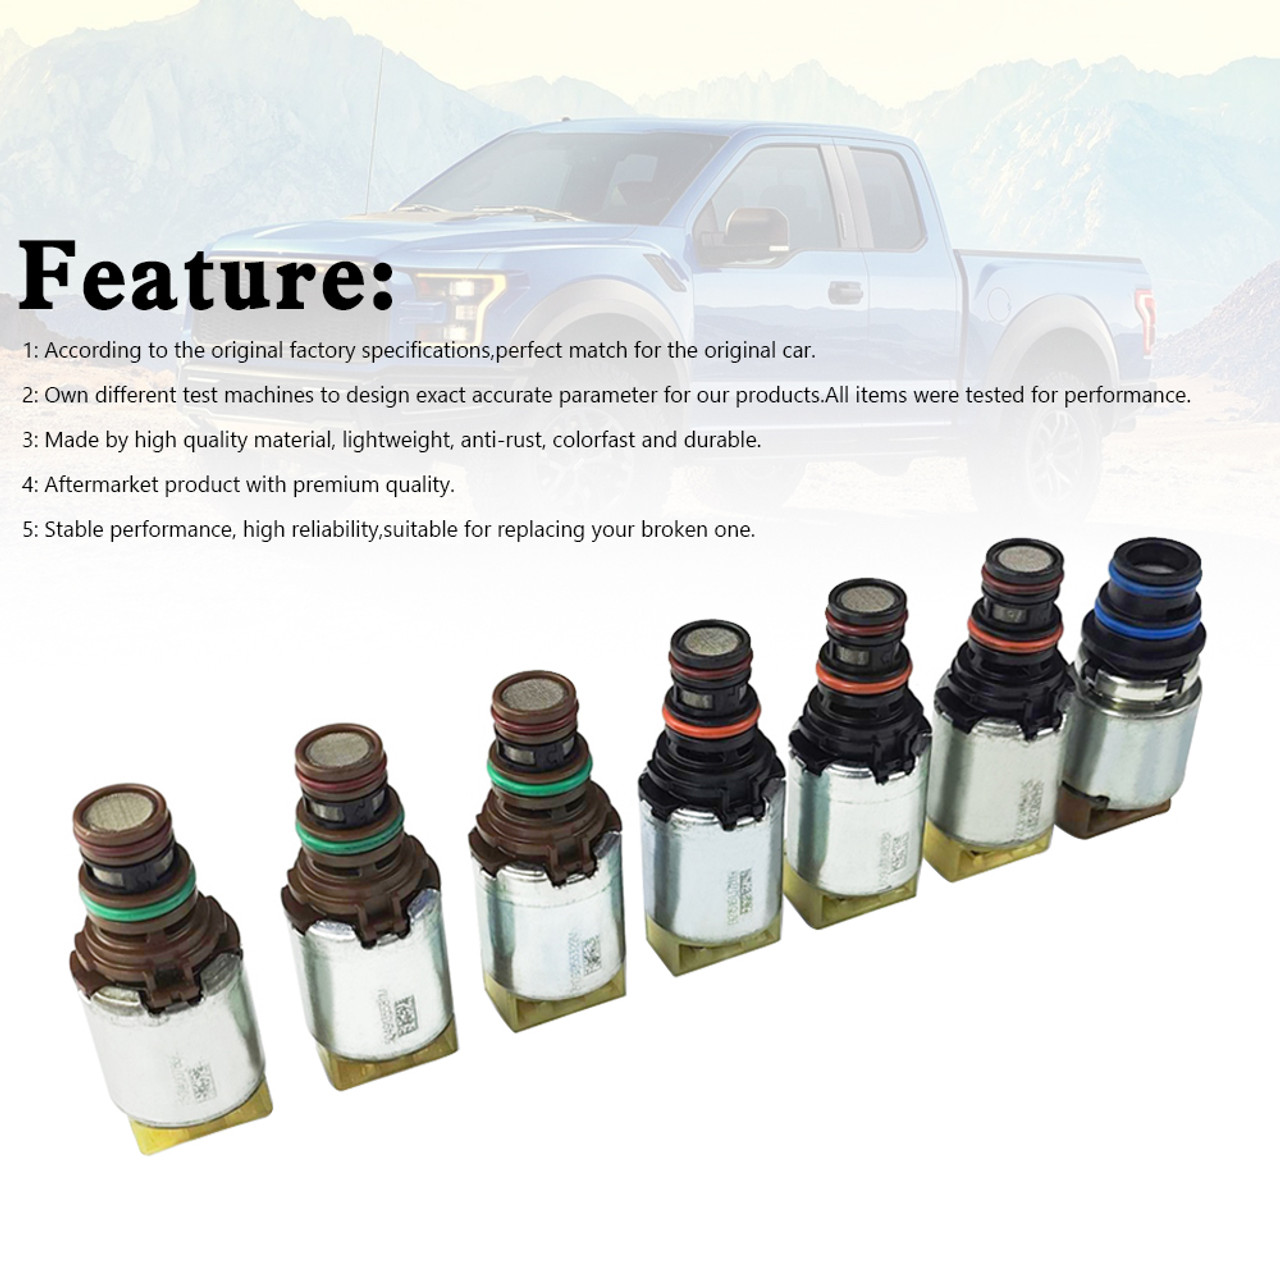 7PCS 6R80 Transmission Valve Body Solenoid Kit For Ford F-150/Expedition